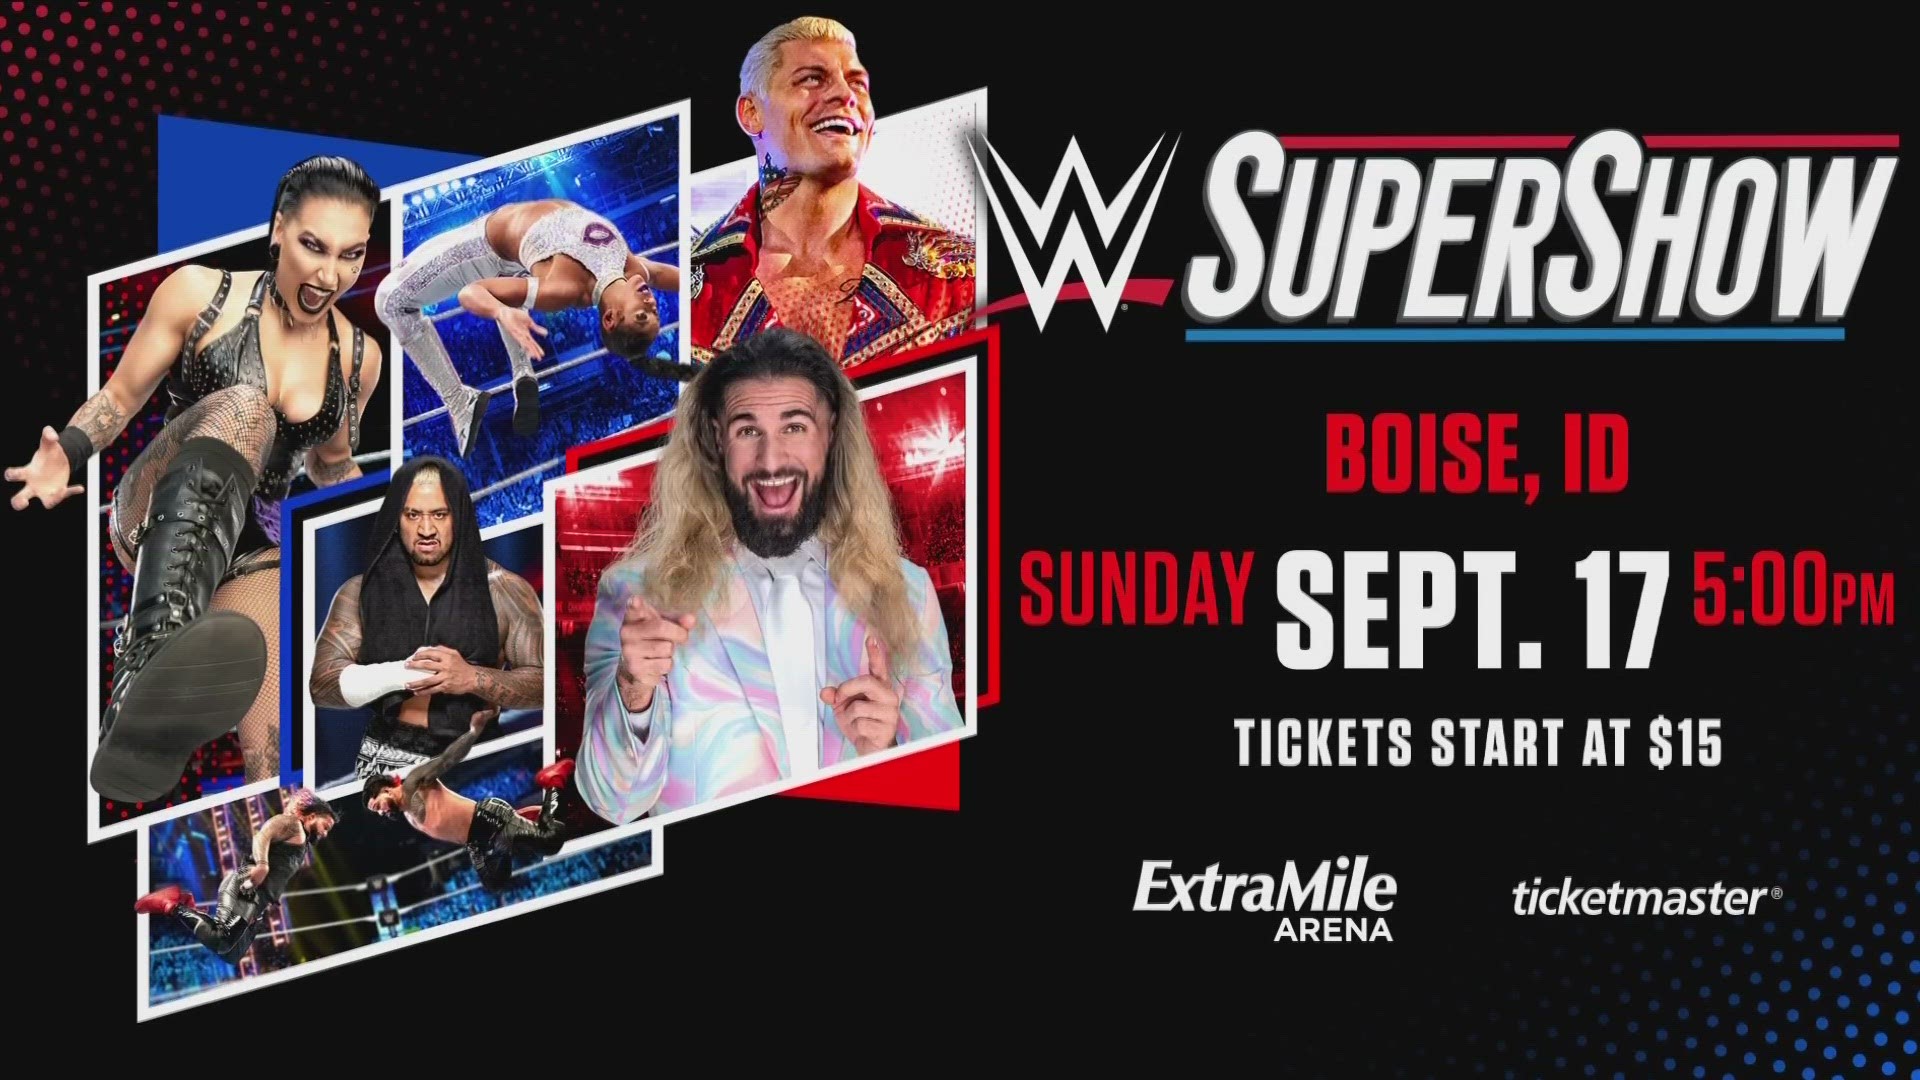 WWE Supershow coming to Boise this fall ktvb